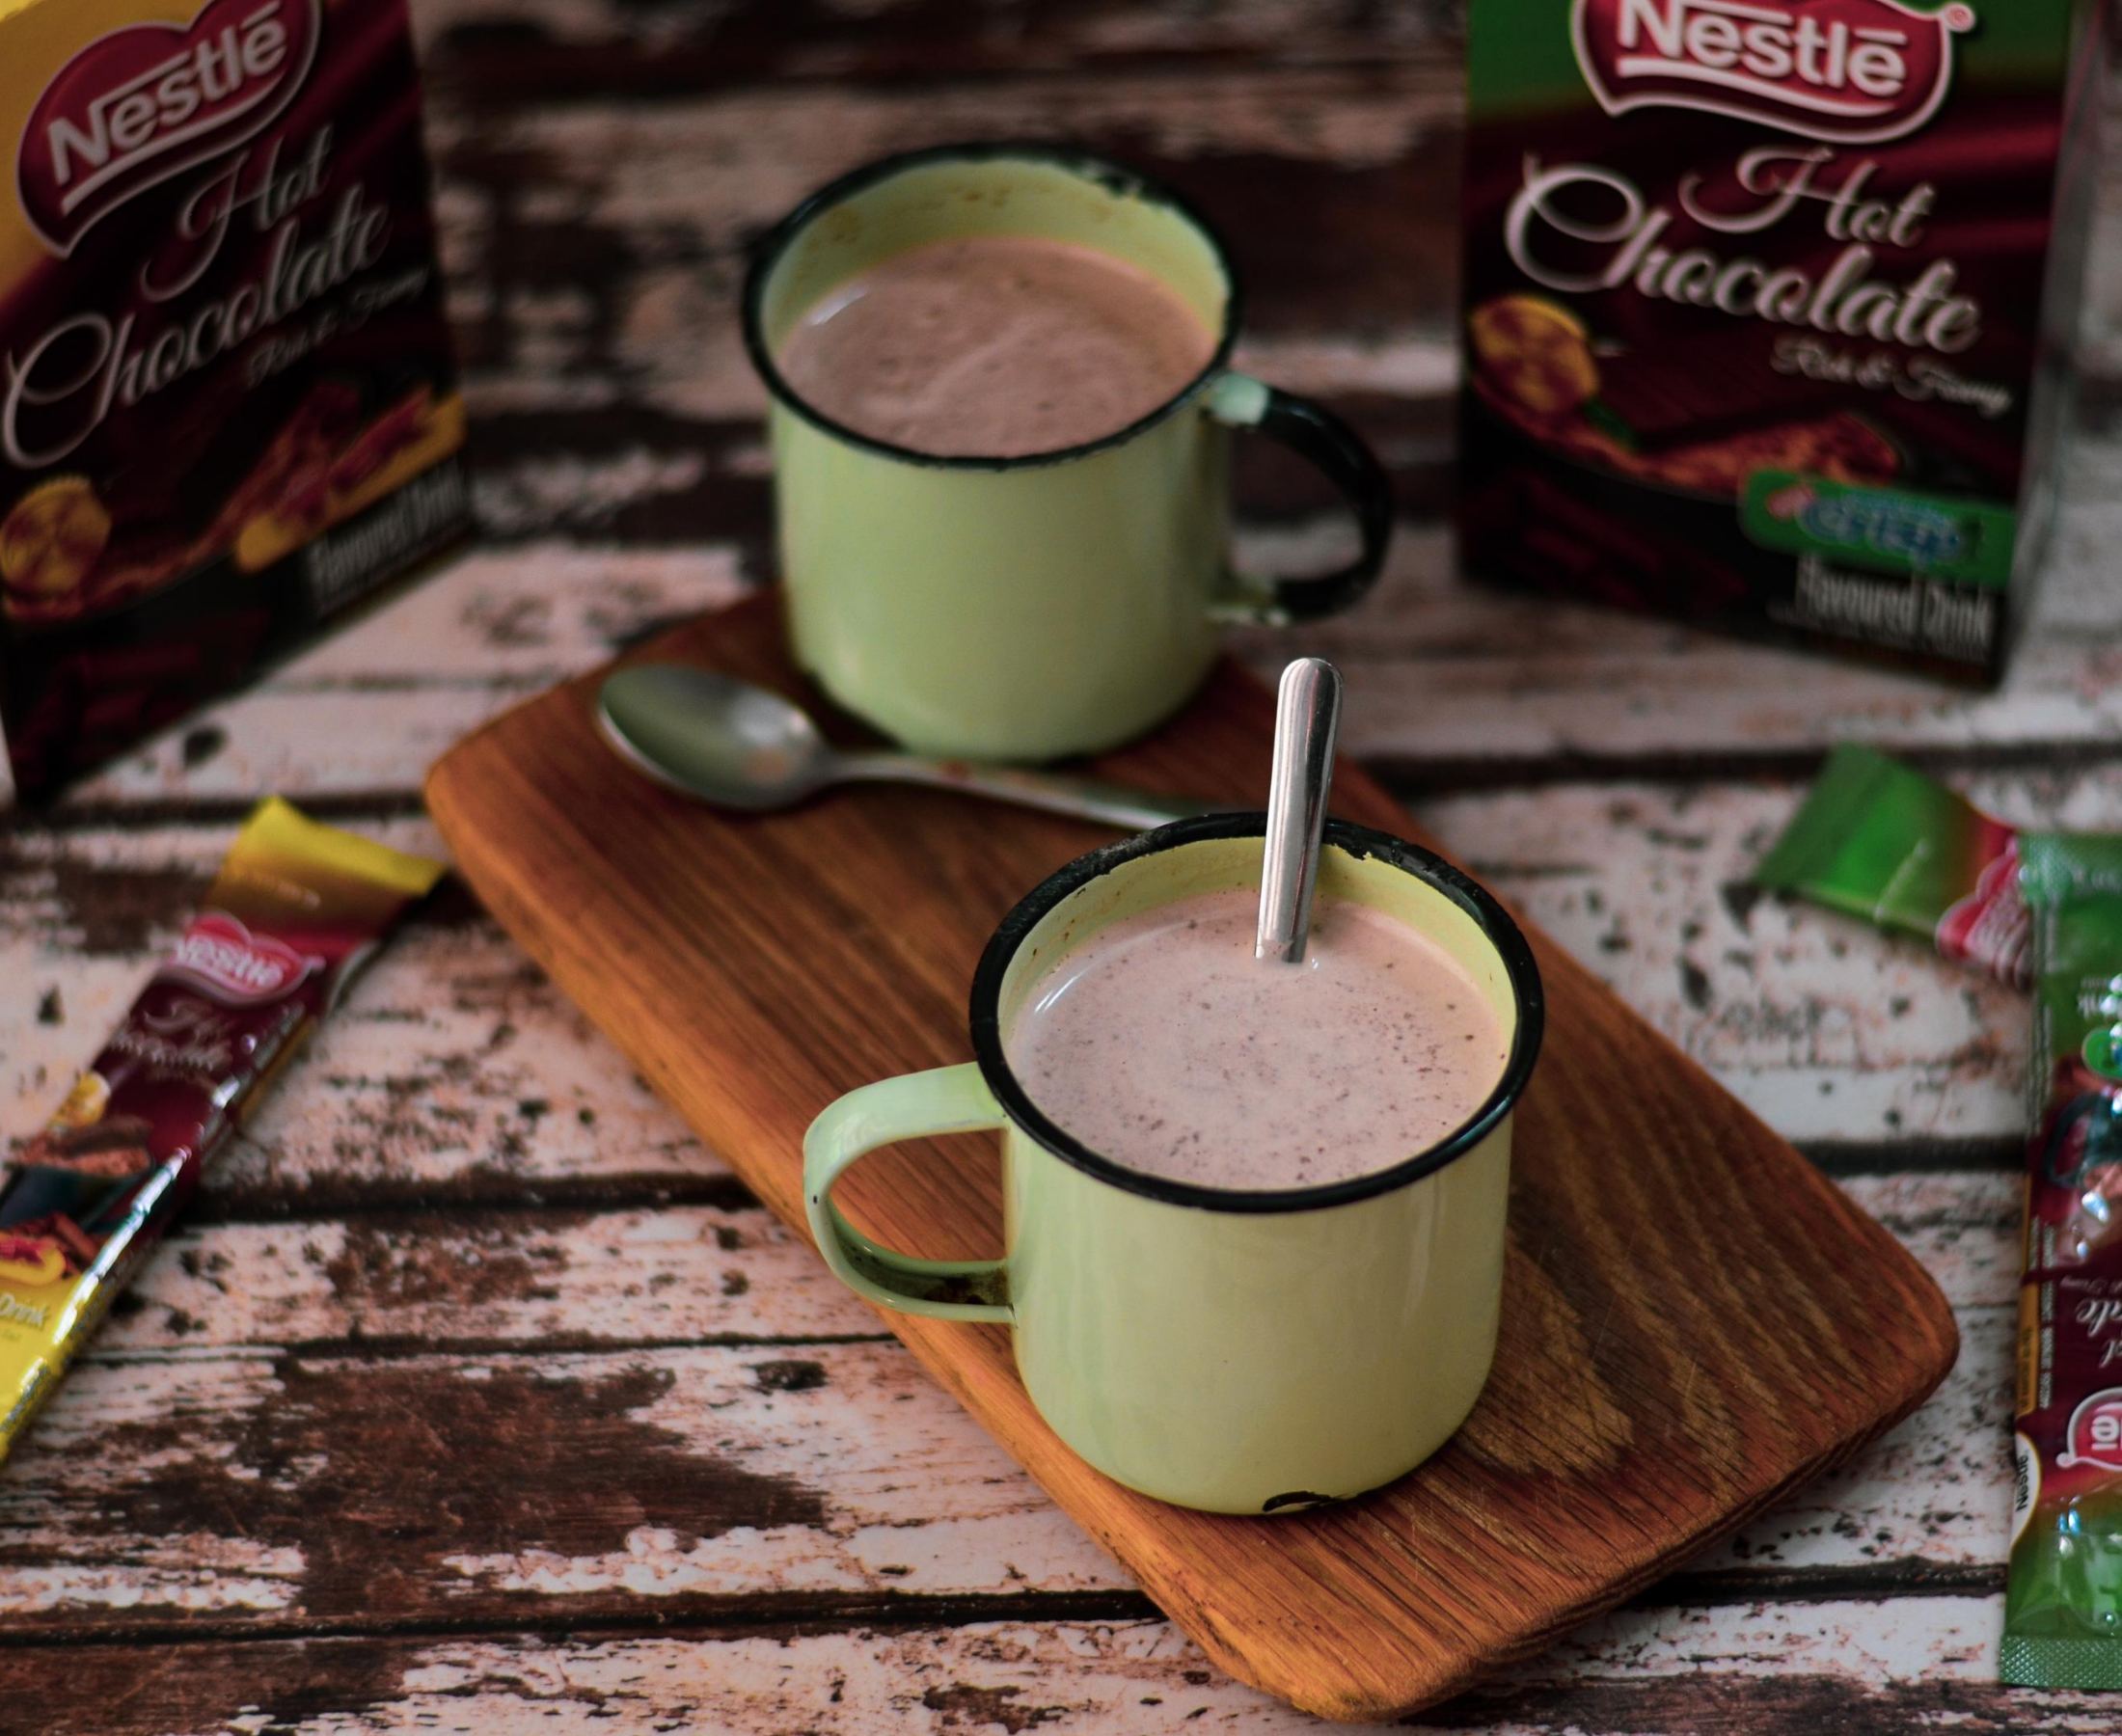 Big news for chocolate lovers: We taste the brand new Peppermint Crisp and Tex flavoured hot chocolates